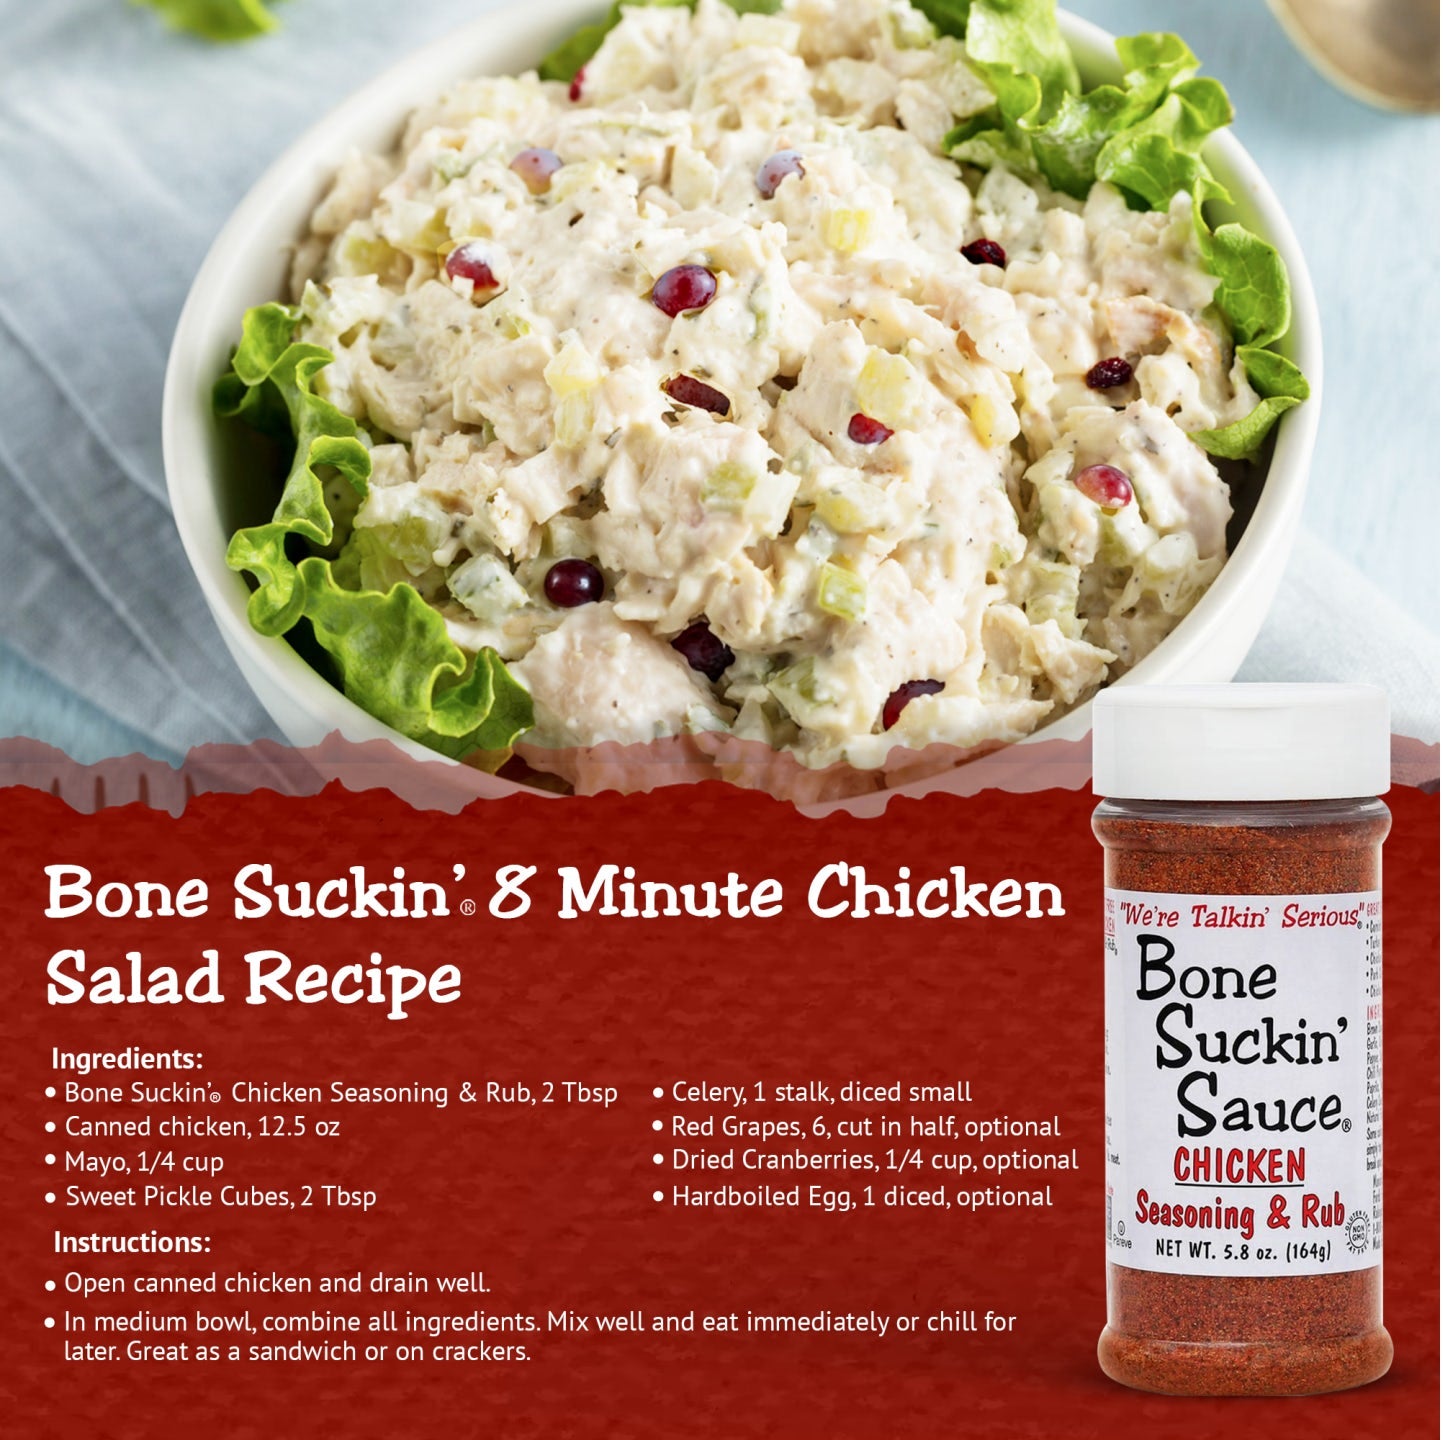 Bone Suckin 8 Minute Chicken Salad Recipe. Ingredients: Bone Suckin Chicken Seasoning & Rub, 2 tbsp. Canned chicken, 12.5 oz, Mayo 1/4 cup, Sweet Pickle Cubes, 2 tbsp. Celery 1 stalk, diced small, Red grapes, 6 cut in half, optional. Dried cranberries, 1/4 cup, optional, Hardboiled egg, 1 diced, optional. Instructions: Open canned chicken and drain well. In medium bowl, combine all ingredients. Mx well and eat immediately or chill for later. Great as a sandwich or on crackers.